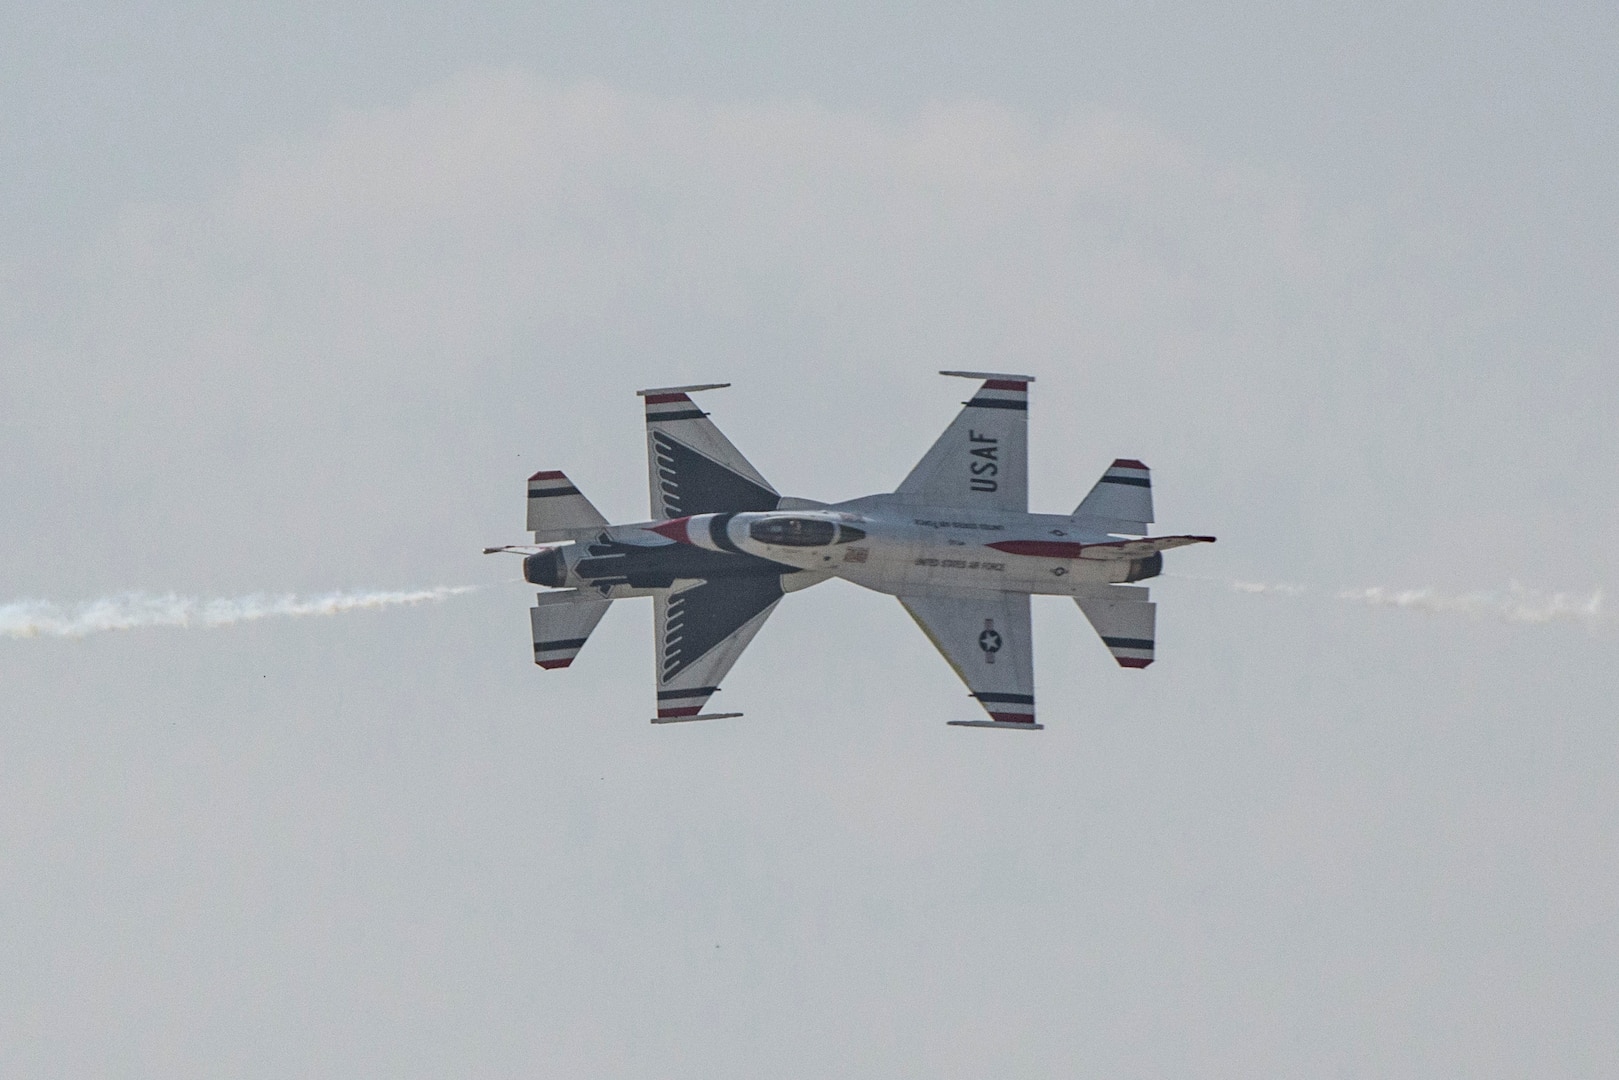 Members of the U.S. Air Force Aerial Demonstration Squadron “Thunderbirds” perform during the 2017 Joint Base San Antonio and Open House rehearsal day Nov. 3, 2017, at JBSA-Lackland, Kelly Field, Texas. Air shows allow the Air Force to display the capabilities of our aircraft to the American taxpayer through aerial demonstrations and static displays.  The air show will allow attendees to get up close and personal to see some of the equipment and aircraft used by the U.S. military today. (U.S. Air Force photo by Senior Airman Stormy Archer)